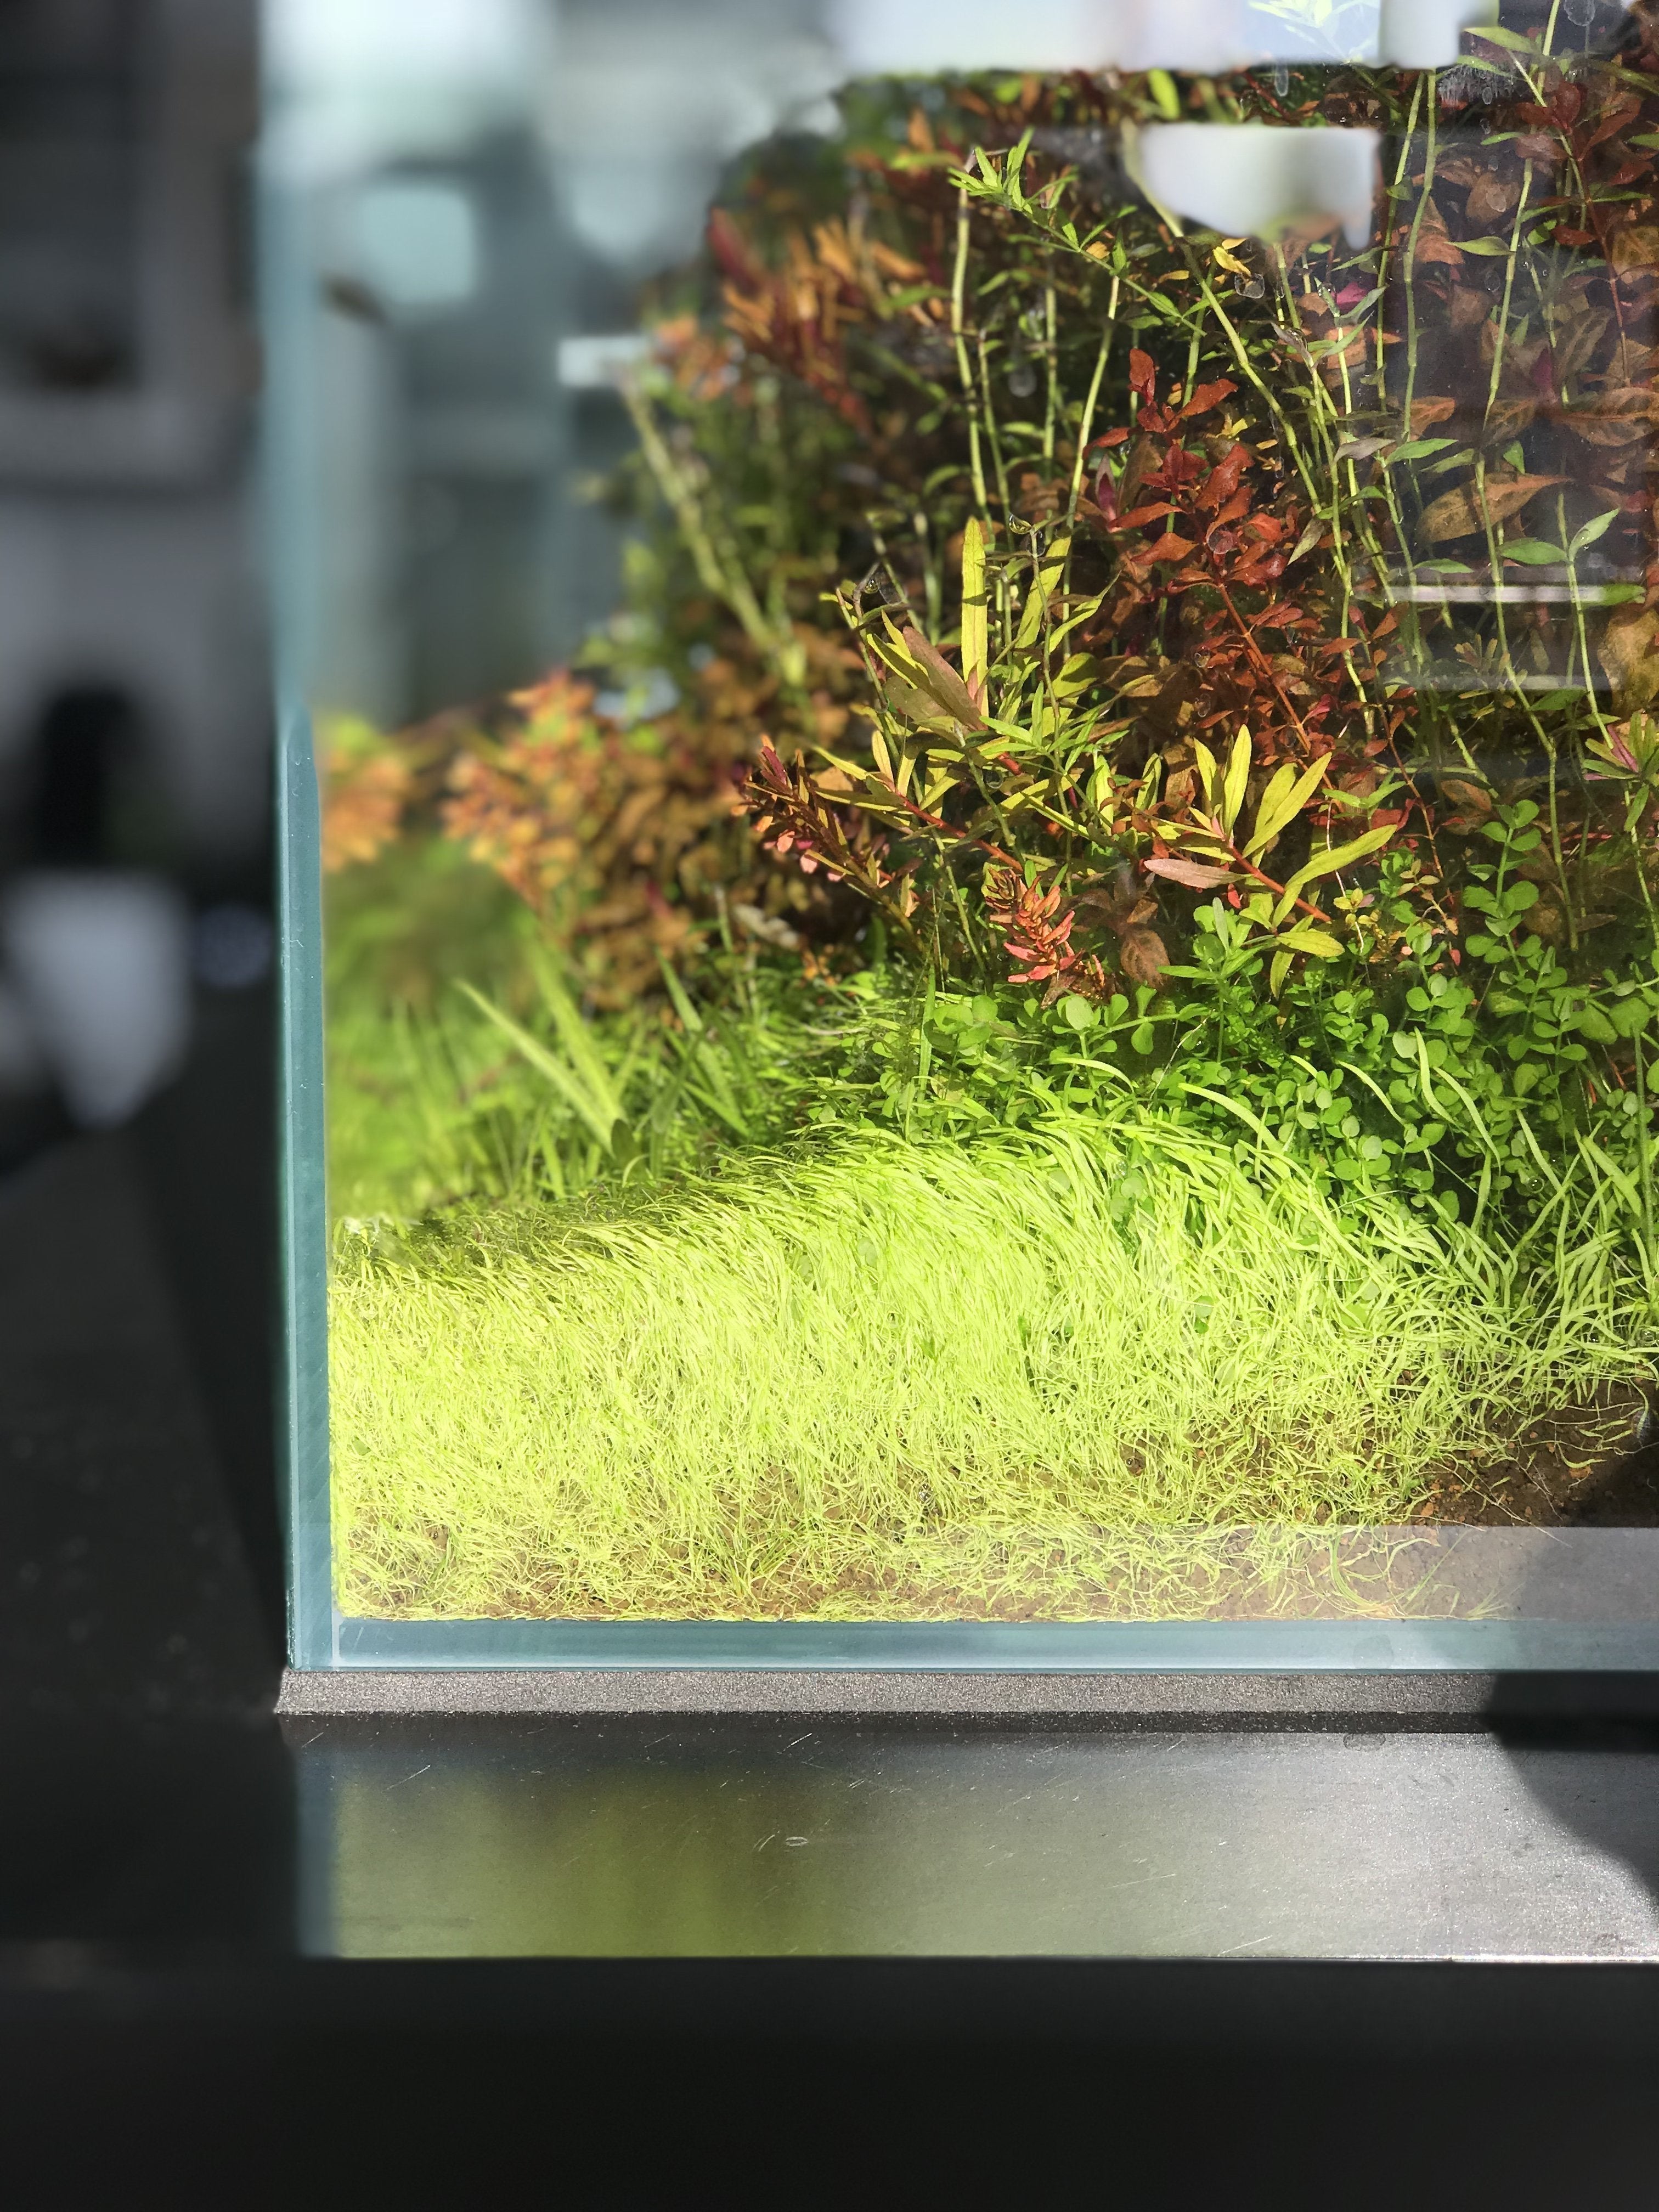 How To Grow Java Moss Carpet On Sand In A RIGHT WAY?